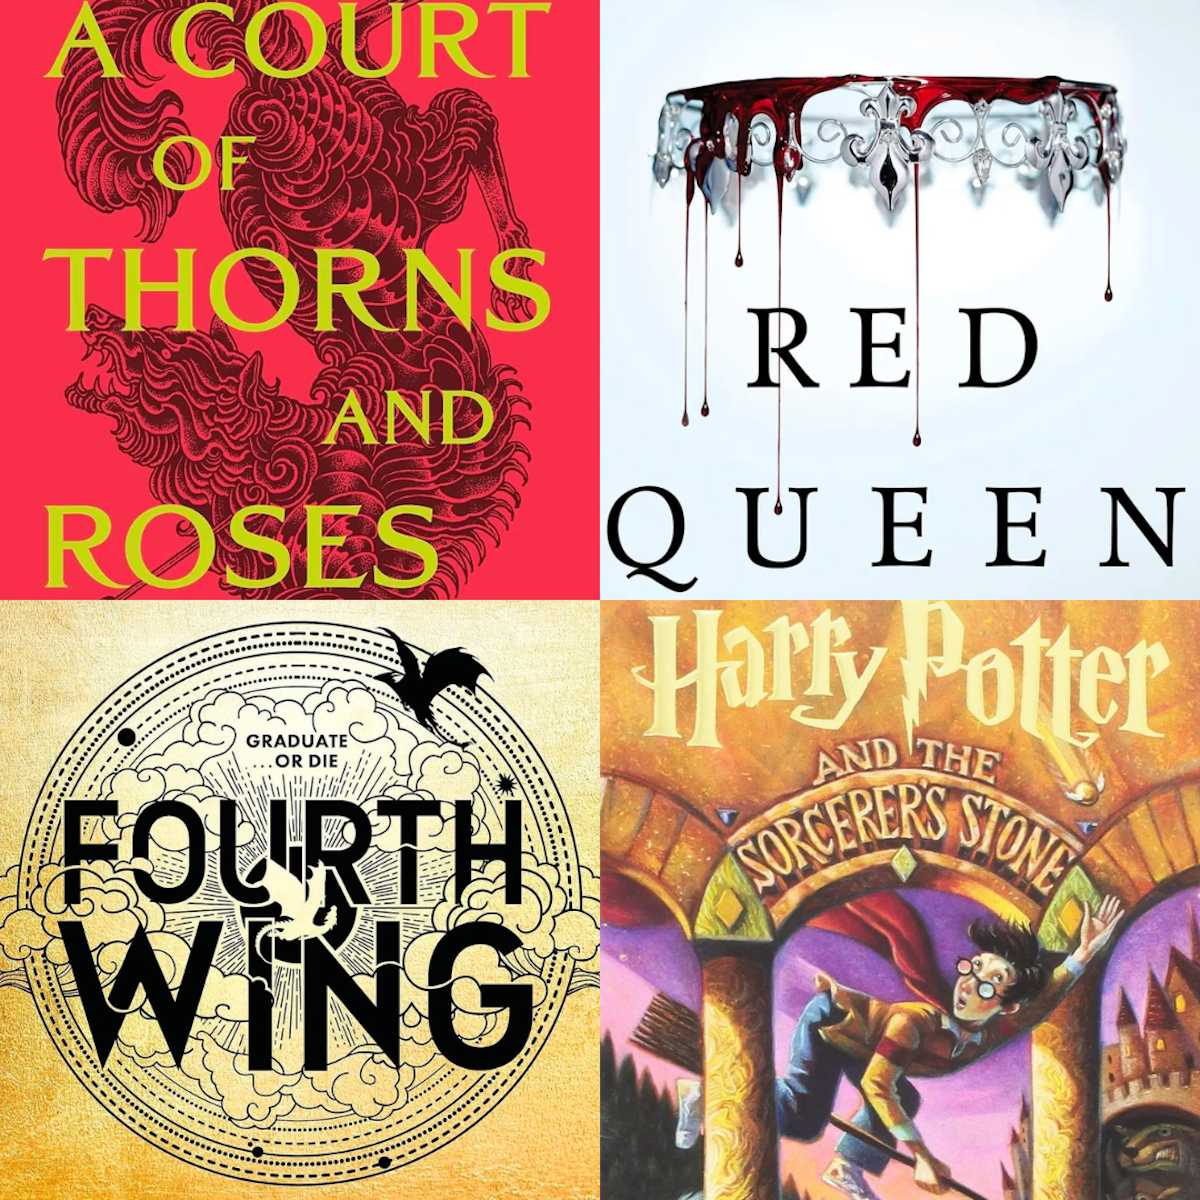 fantasy books a court of thorns and roses fourth wing harry potter red queen